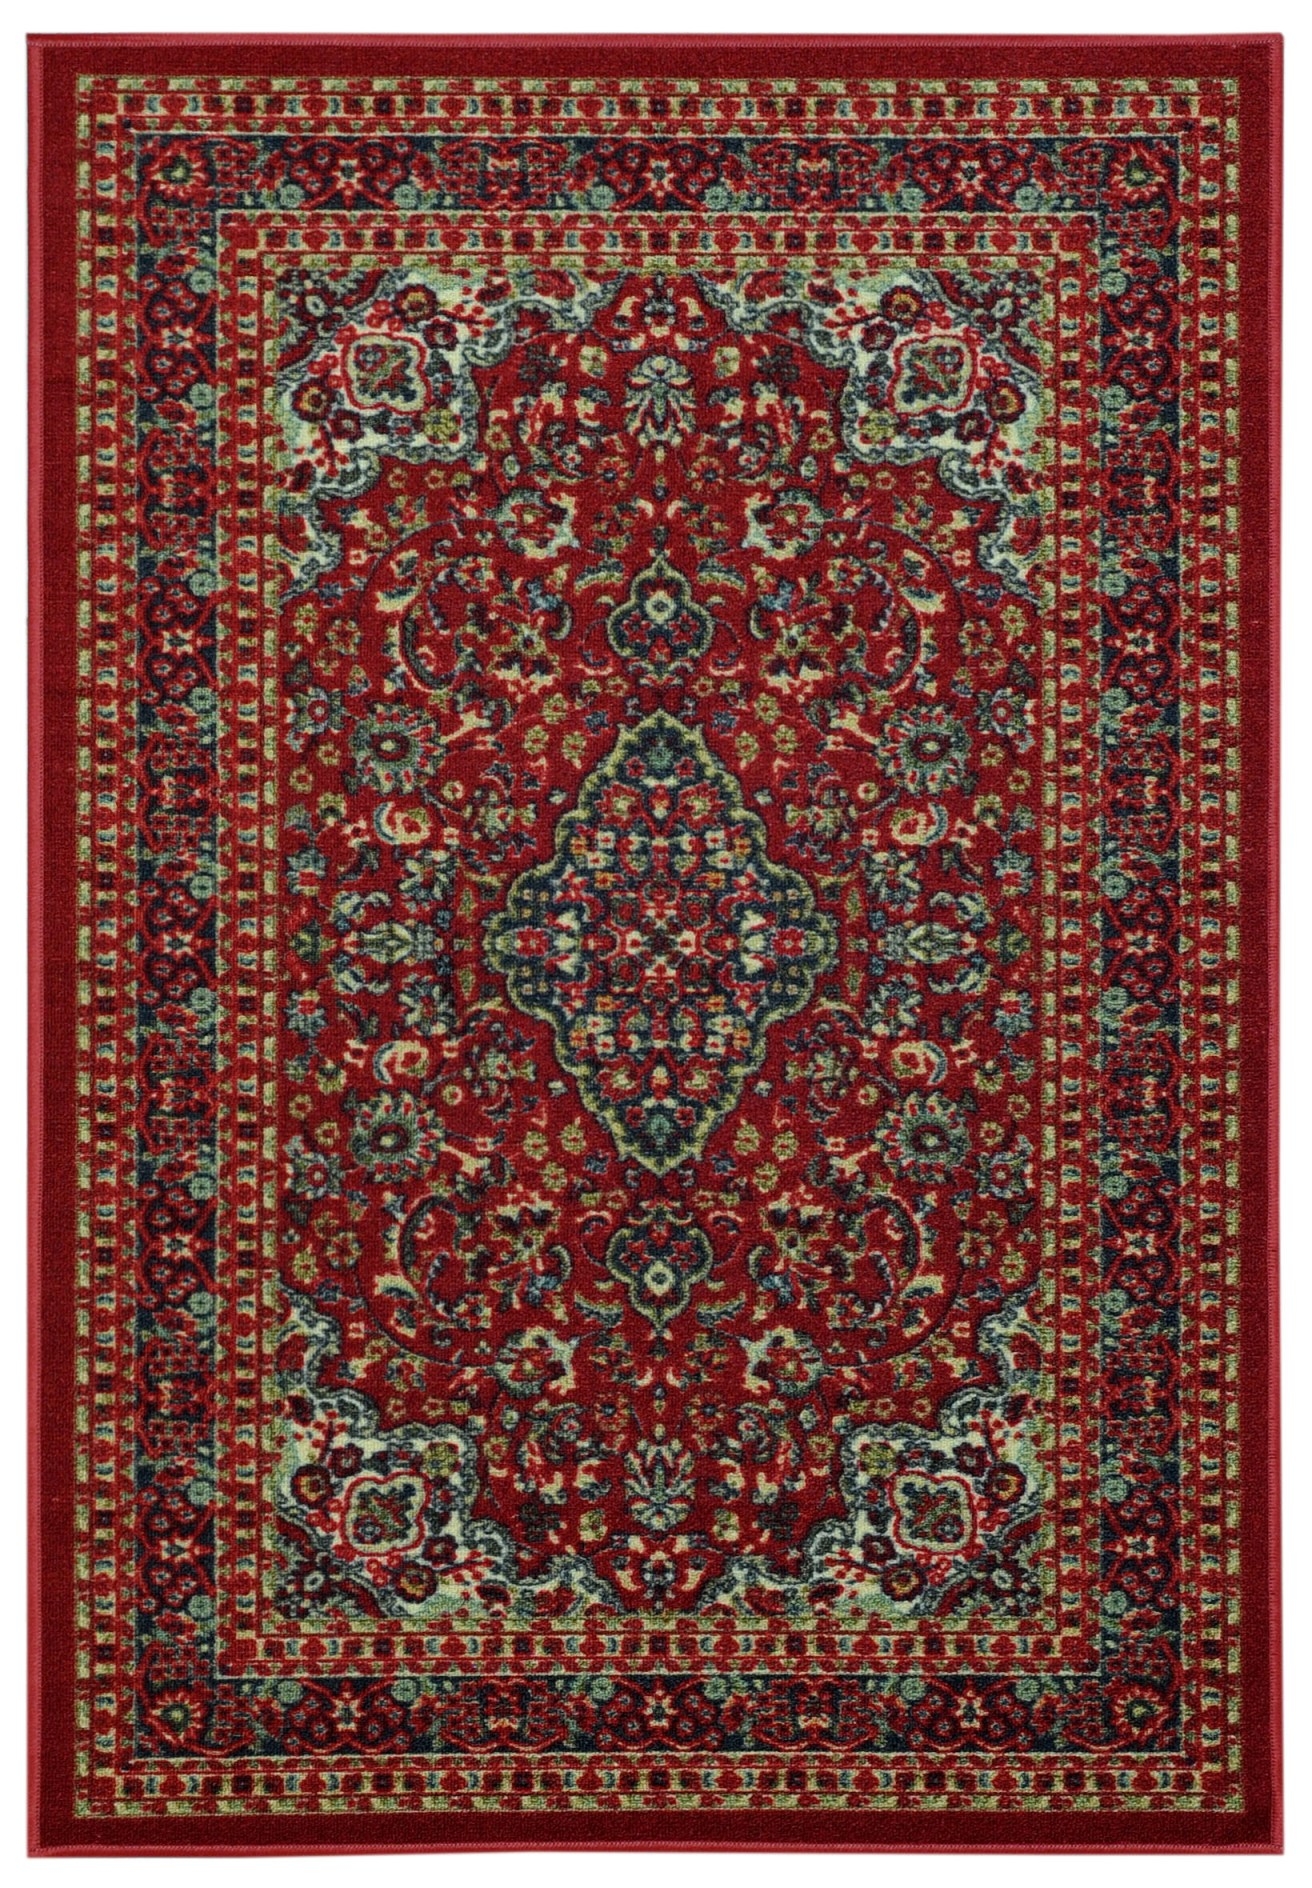 Rubber Backed Area Rugs Visualhunt, Area Rugs With Rubber Backing